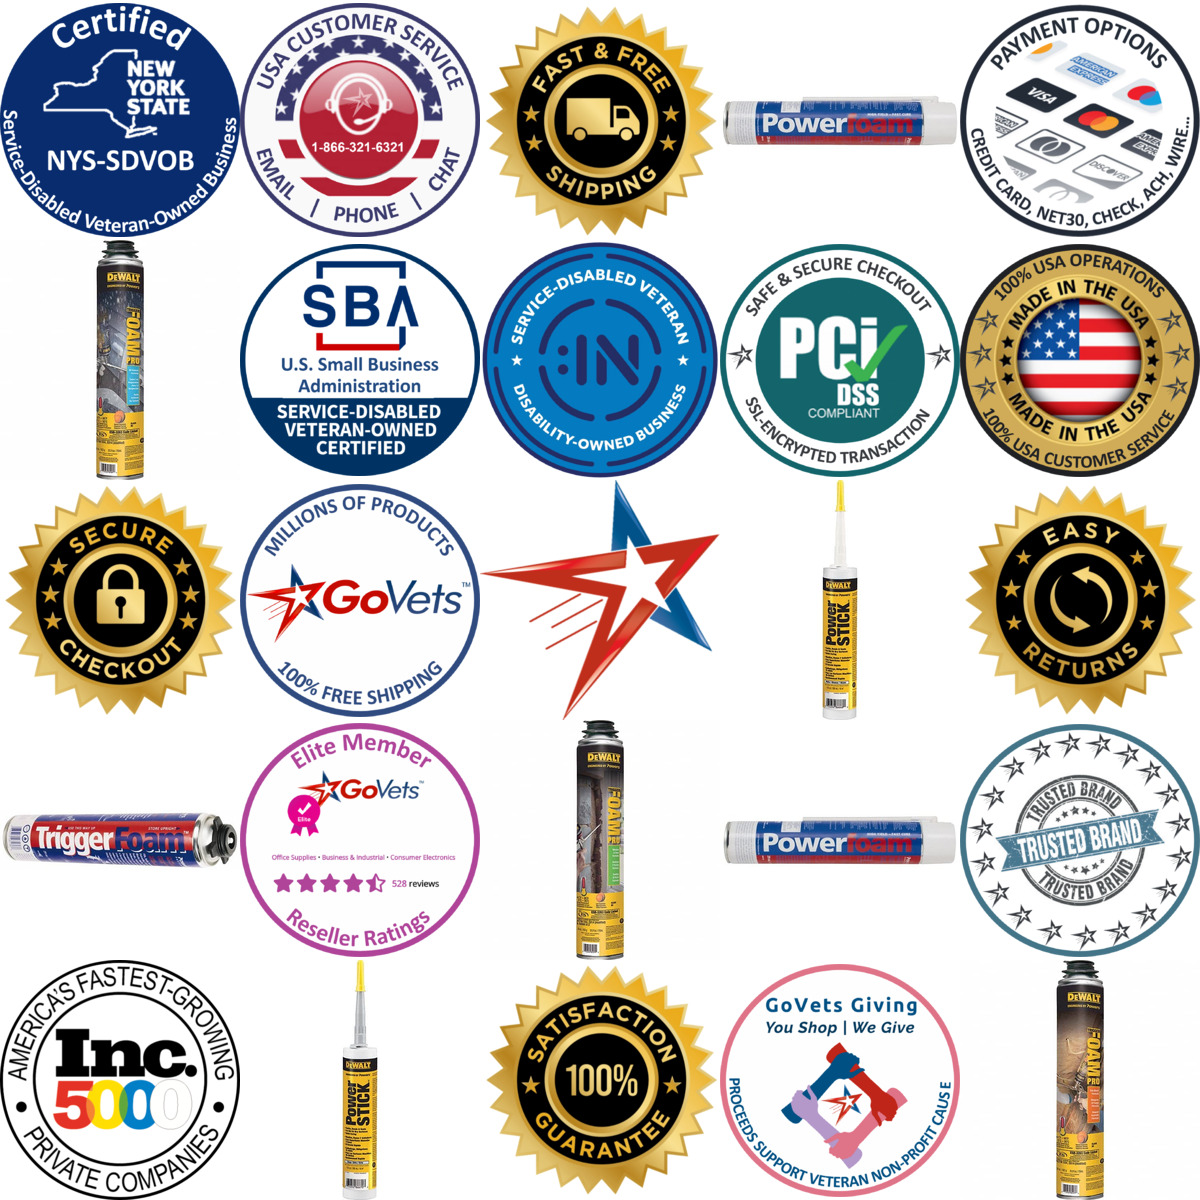 A selection of Dewalt Anchors and Fasteners products on GoVets